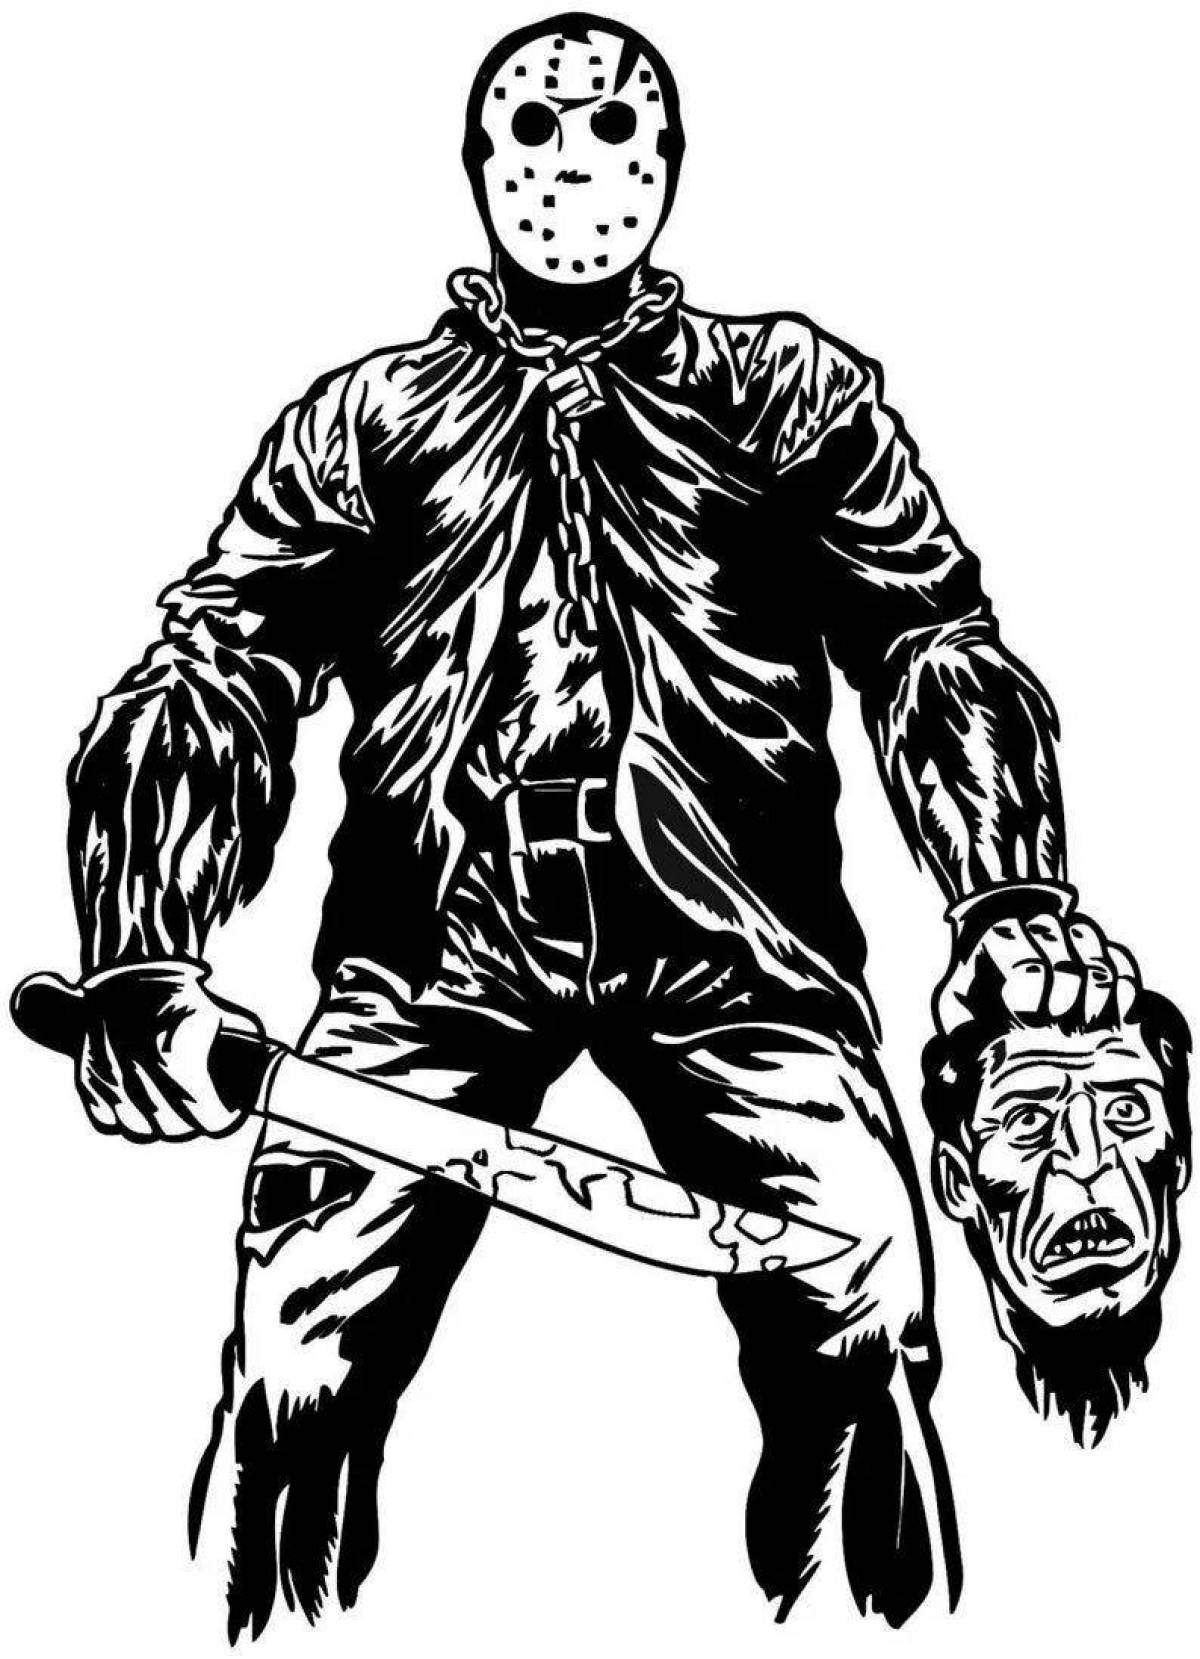 Monster Friday the 13th coloring book